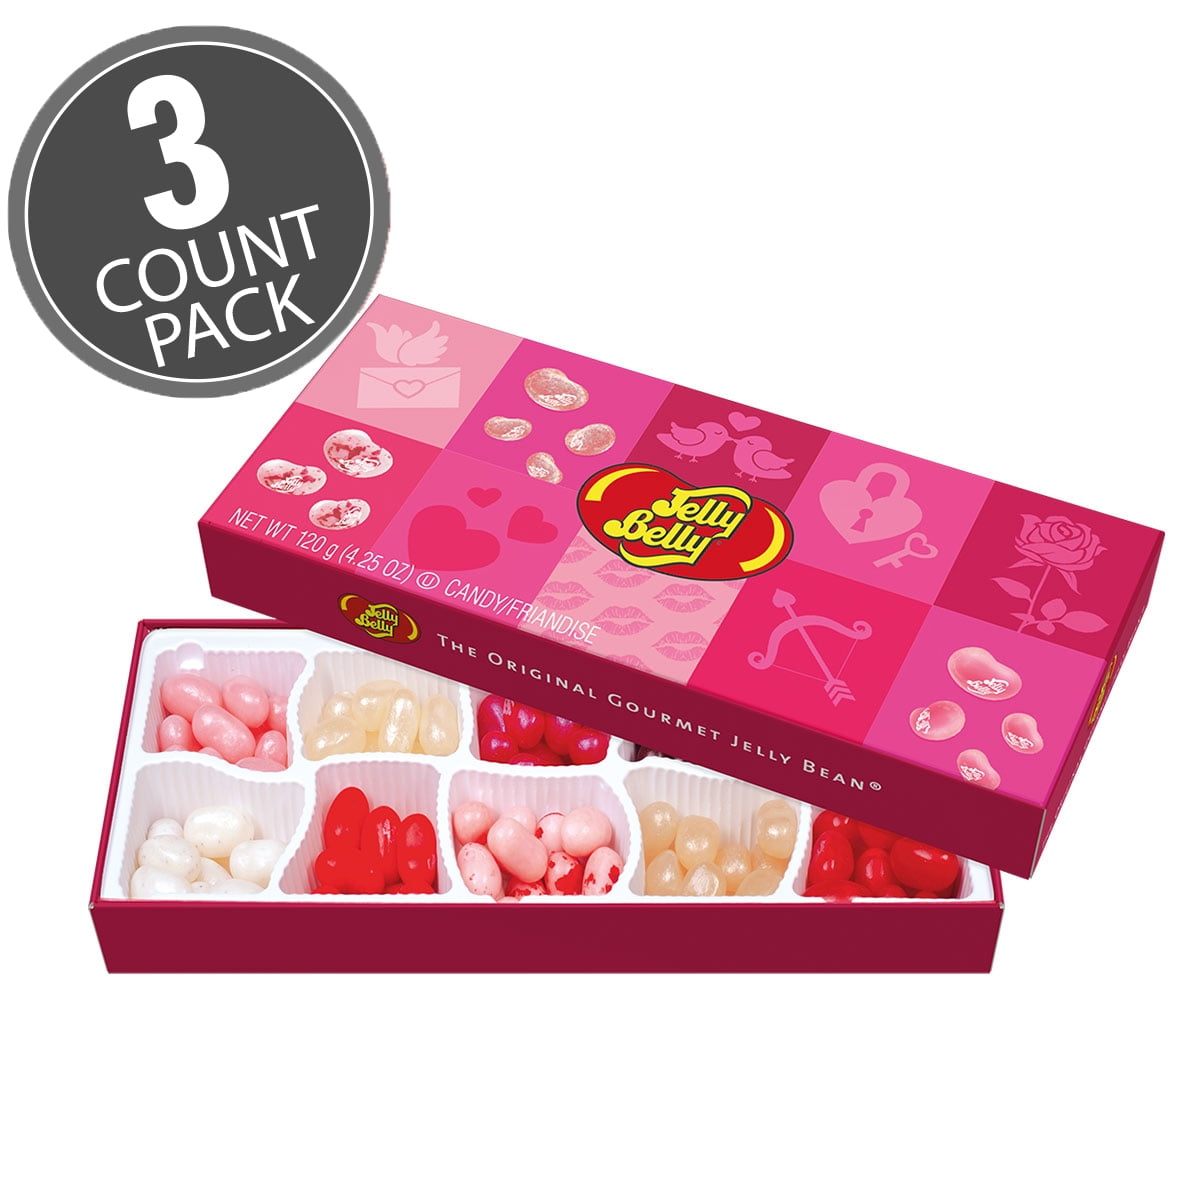 49 Assorted Jelly Bean Flavors - 7.5 oz Gift Bag